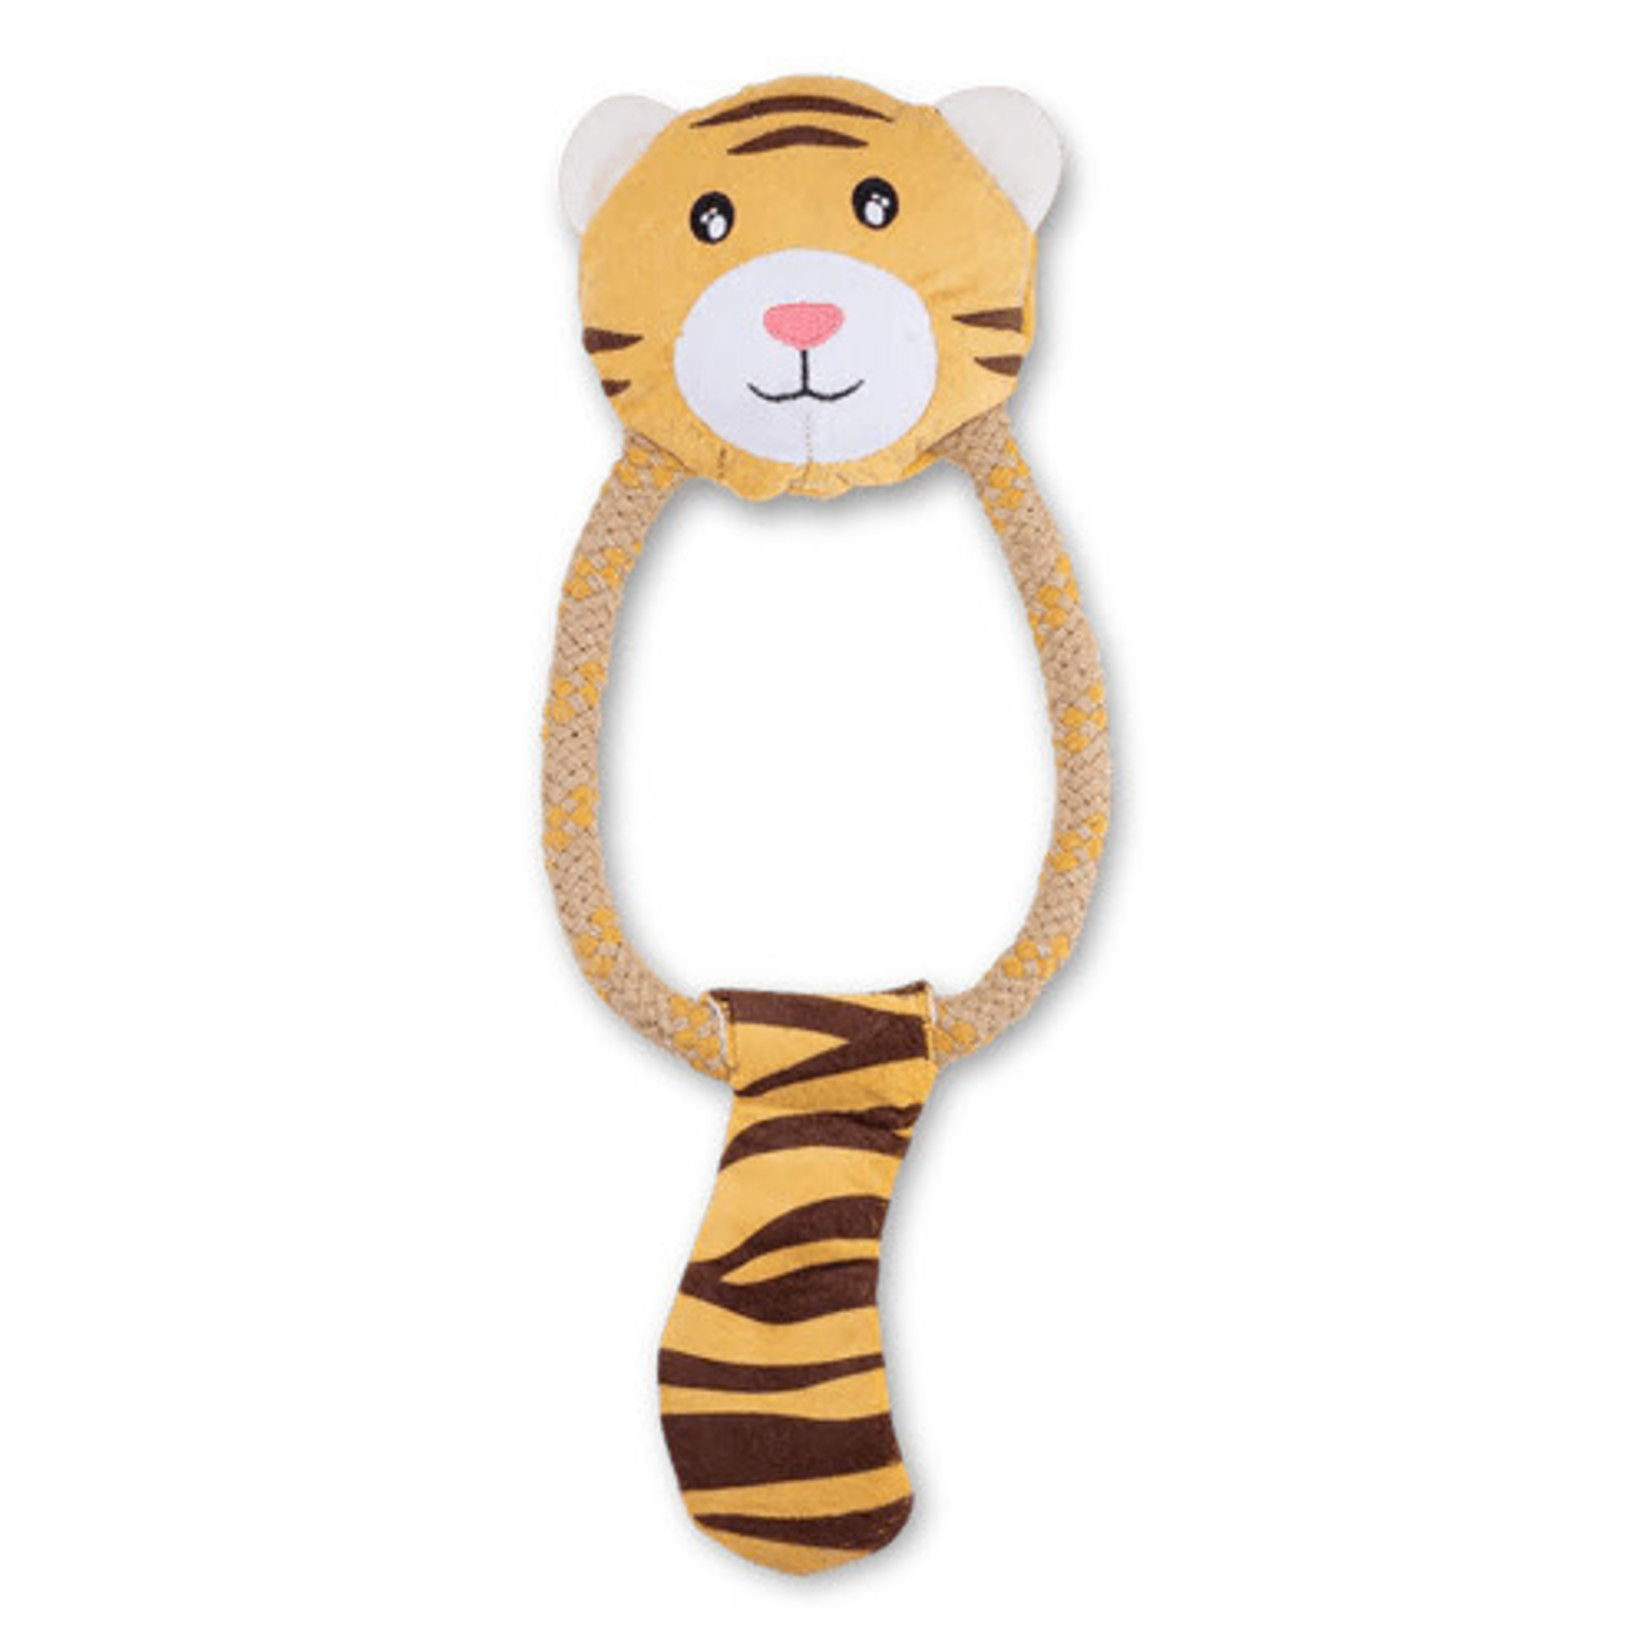 Beco Pets Beco Tiger in a Rope Dog Toy